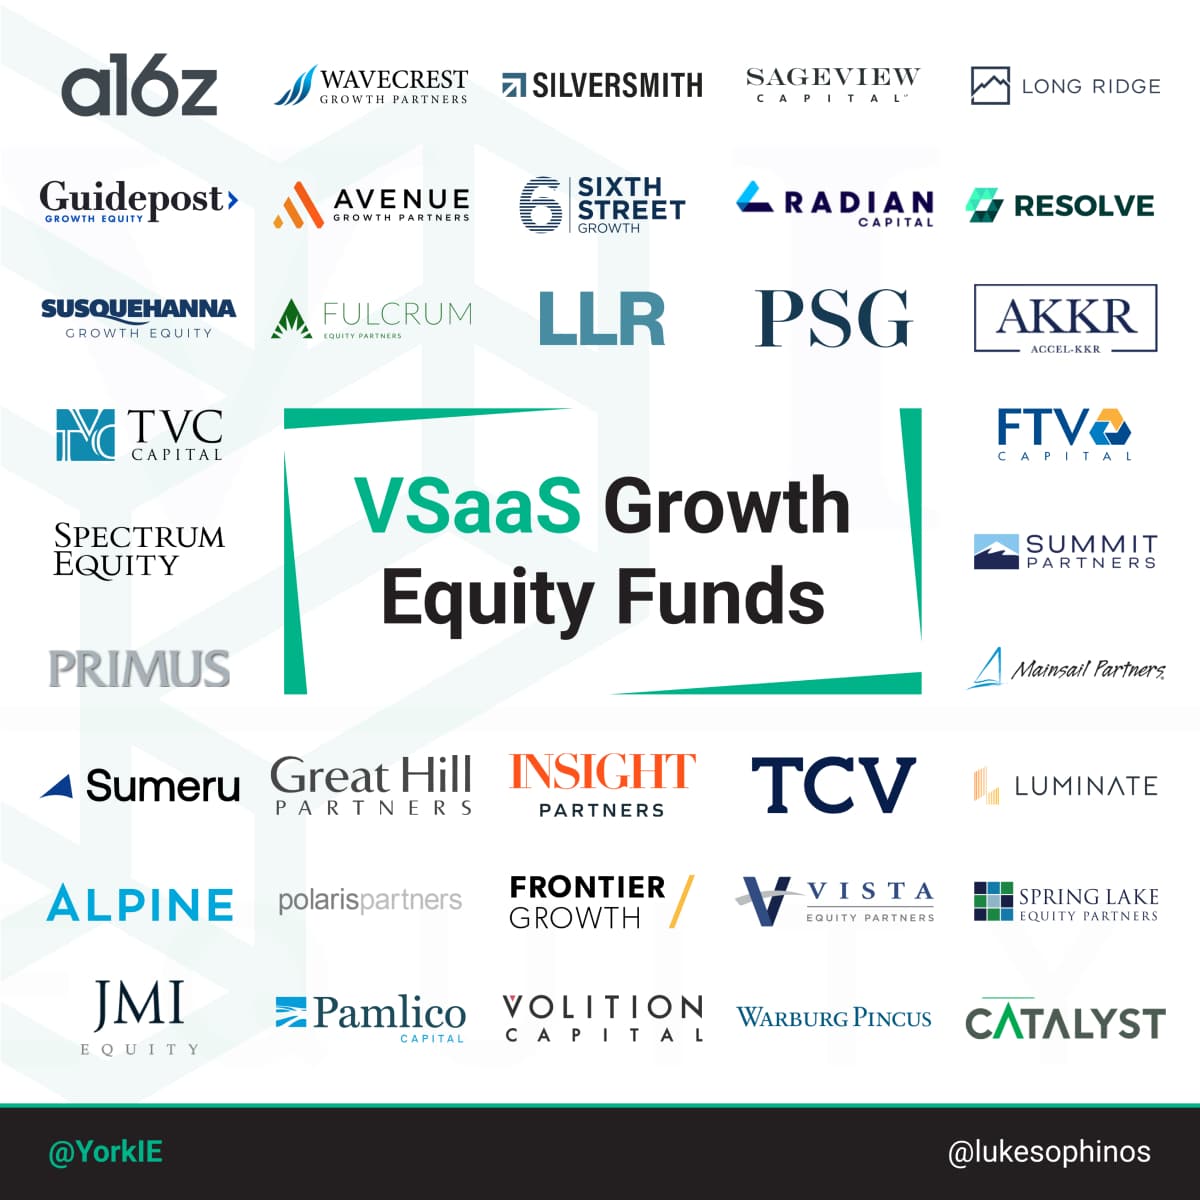 Are you a vertical SaaS founder looking for investment? We've teamed up with @lukesophinos to create an extensive list of growth equity investors and some examples of their vSaaS portcos! Get it here: hubs.la/Q02r8xfV0